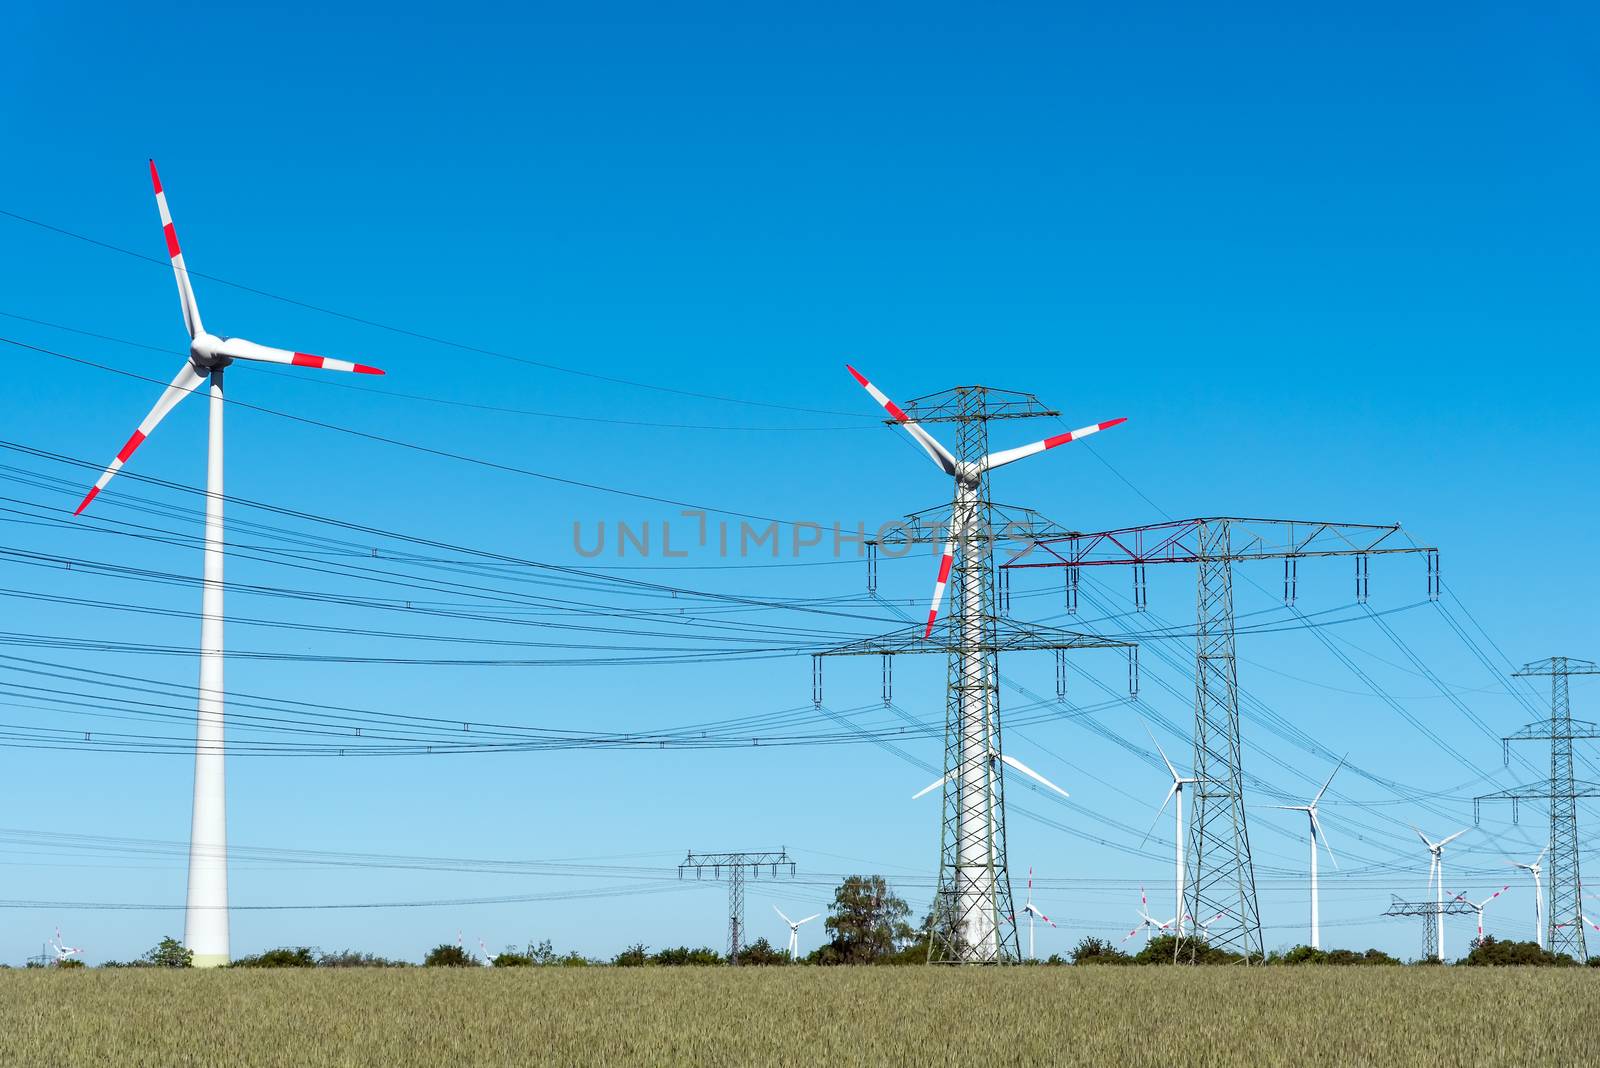 Windwheels and power transmission lines in Germany by elxeneize